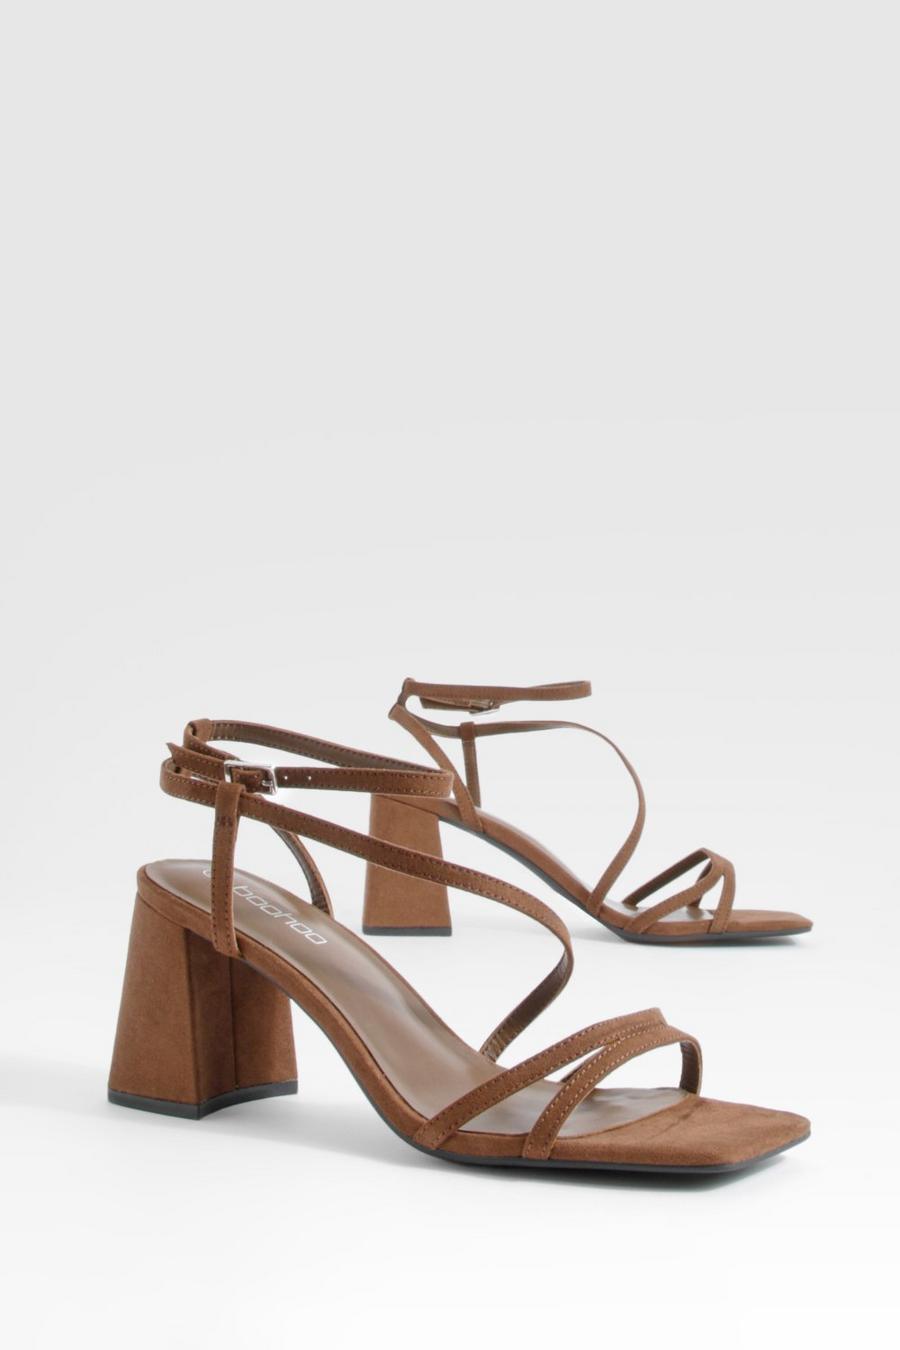 Chocolate brown Double Strap Mid Heel Strappy Sandals 